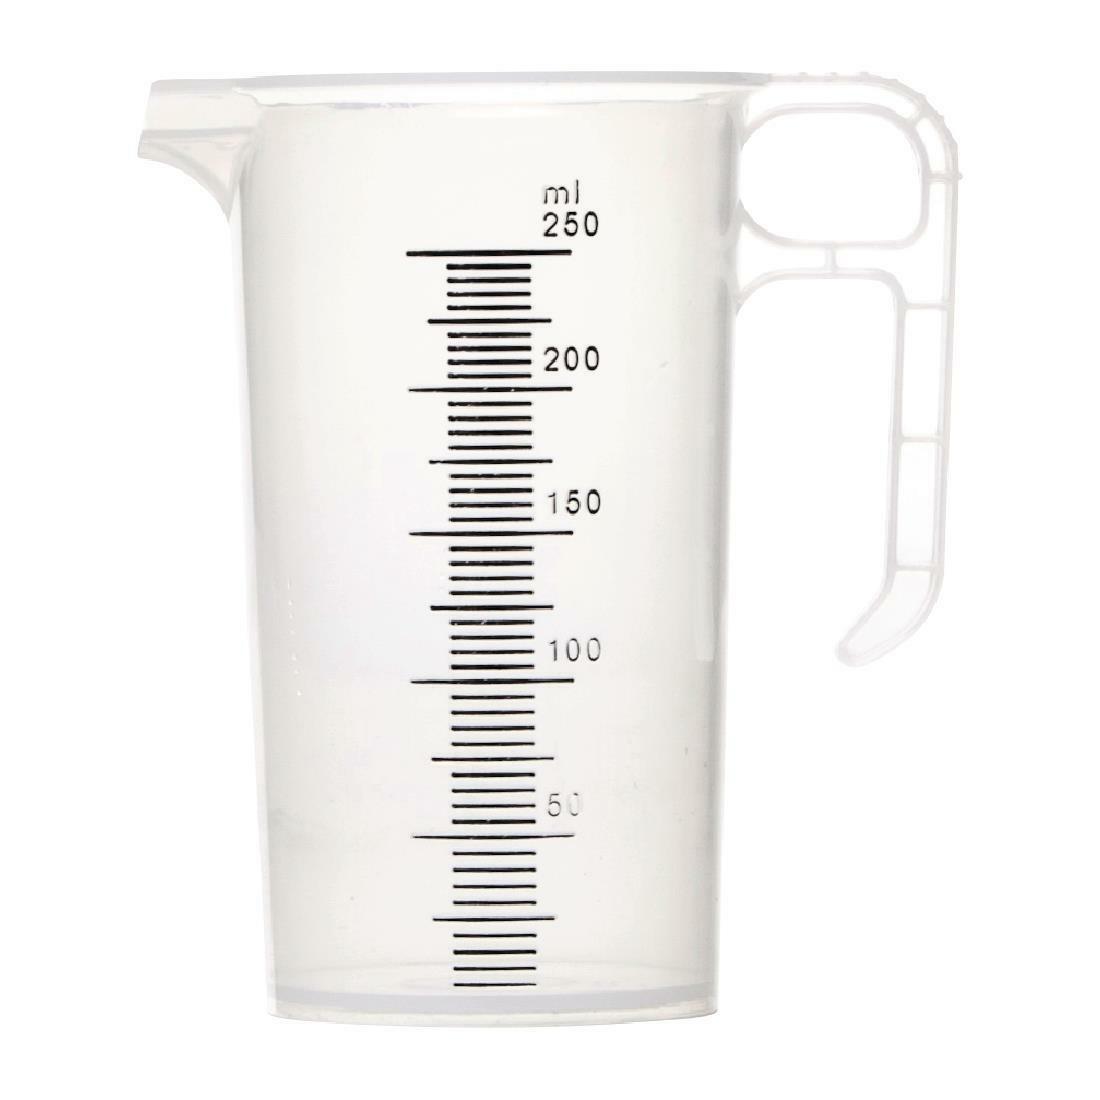 Royal Industries Polycarbonate Liquid Measuring Cup, 1 cup, graduated in  cups/ml